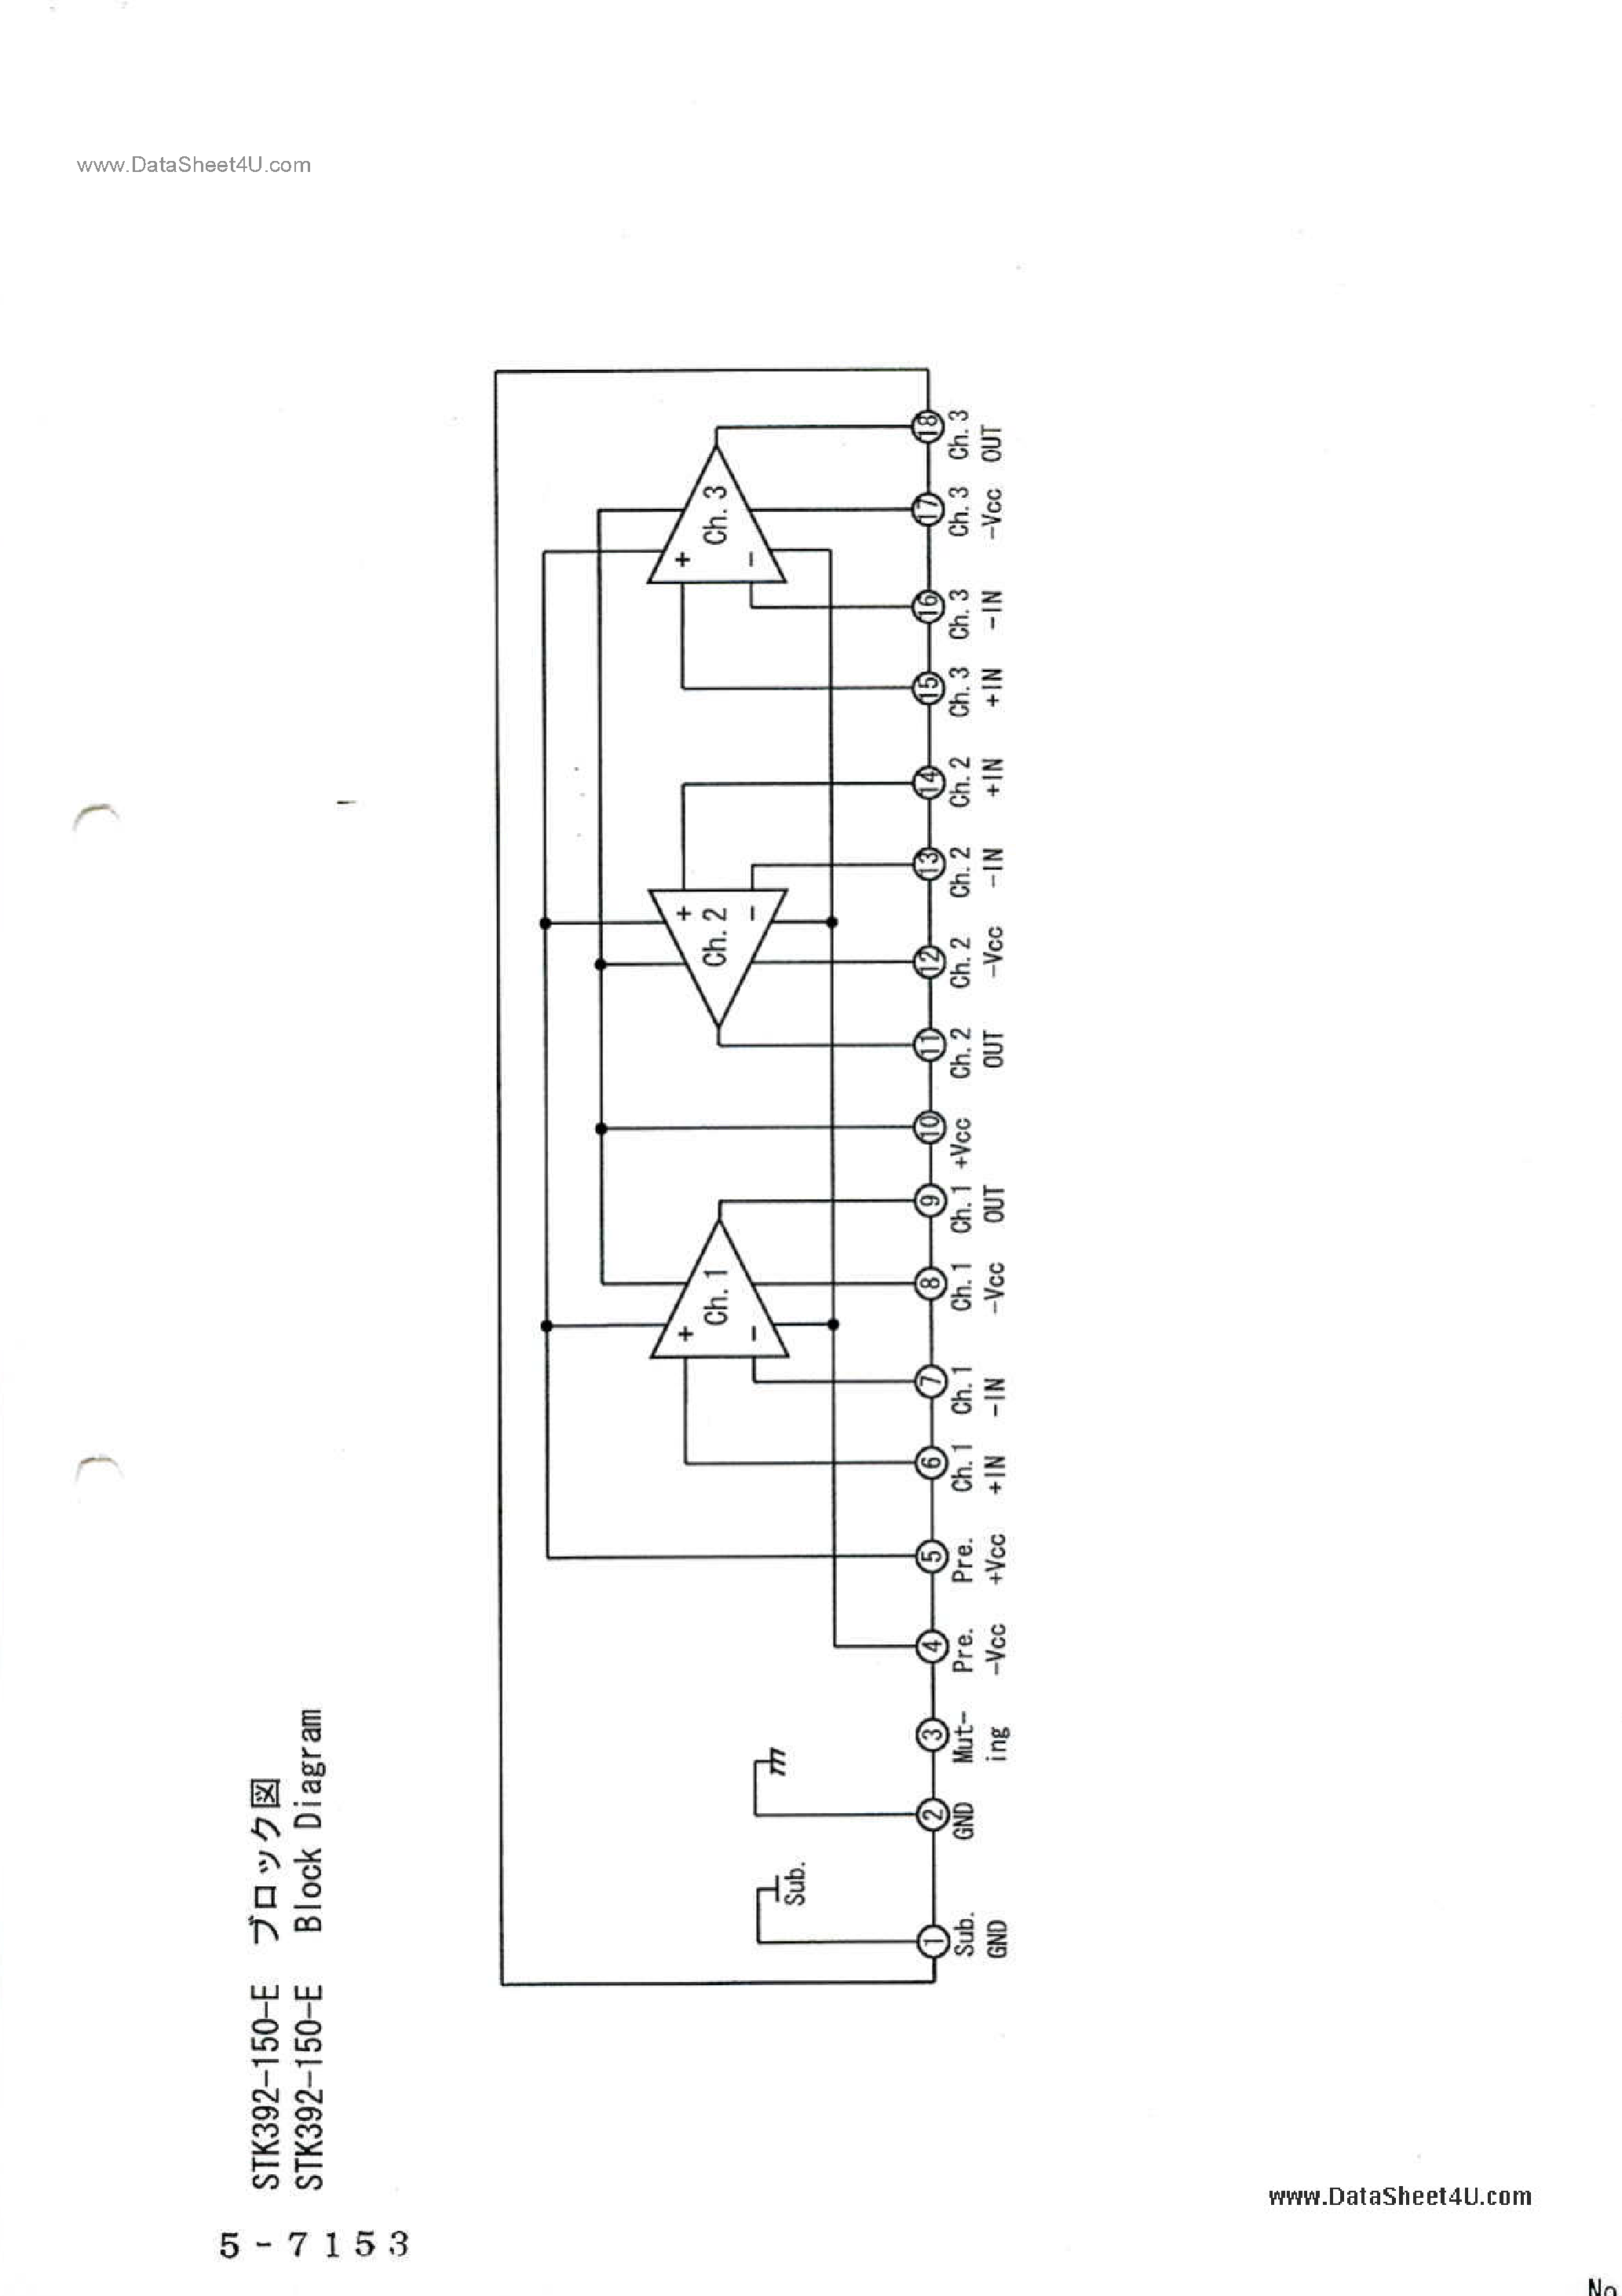 Datasheet STK392-150-E - Current Amplification page 2